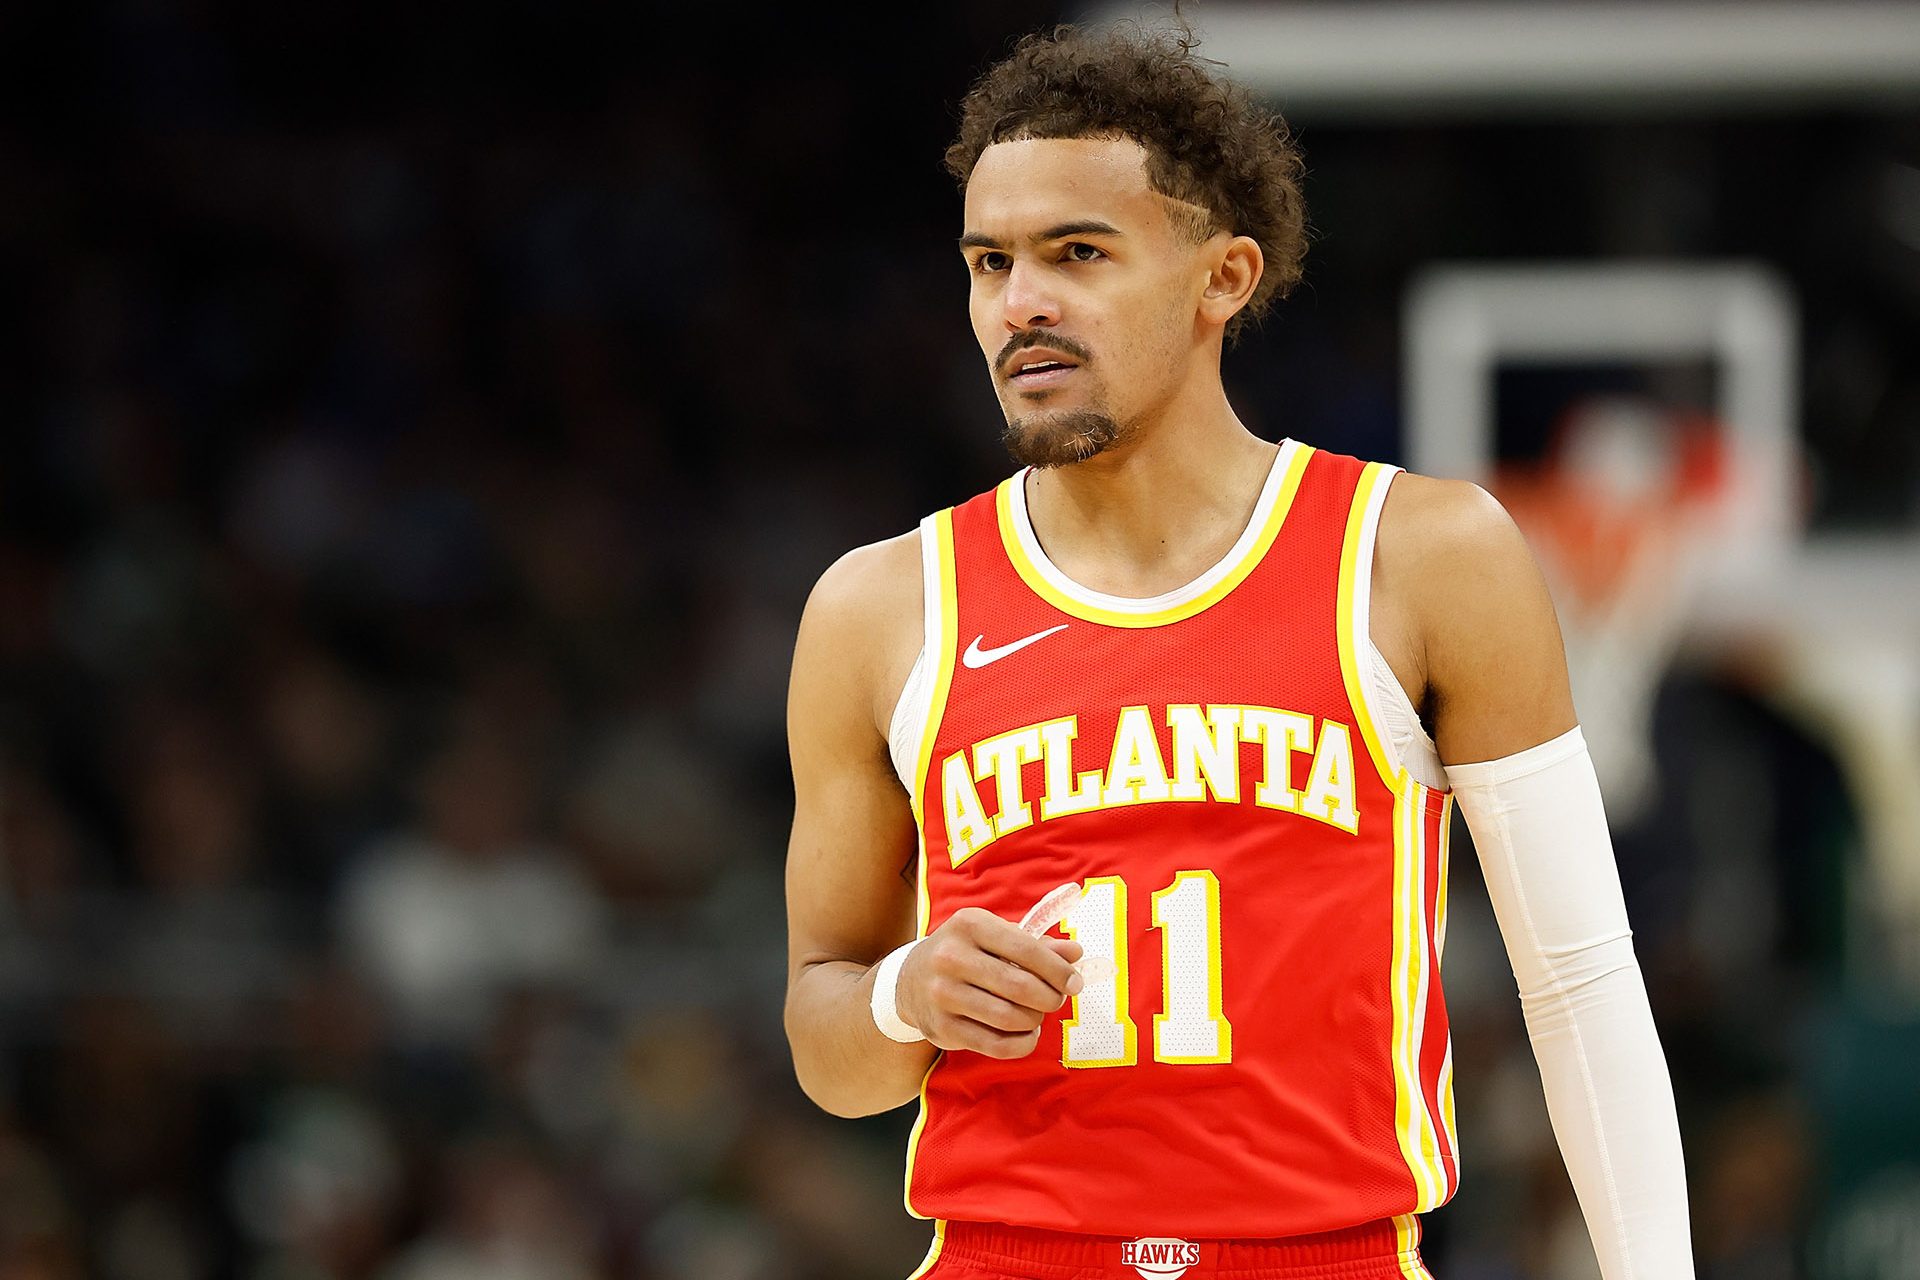 4. Trae Young